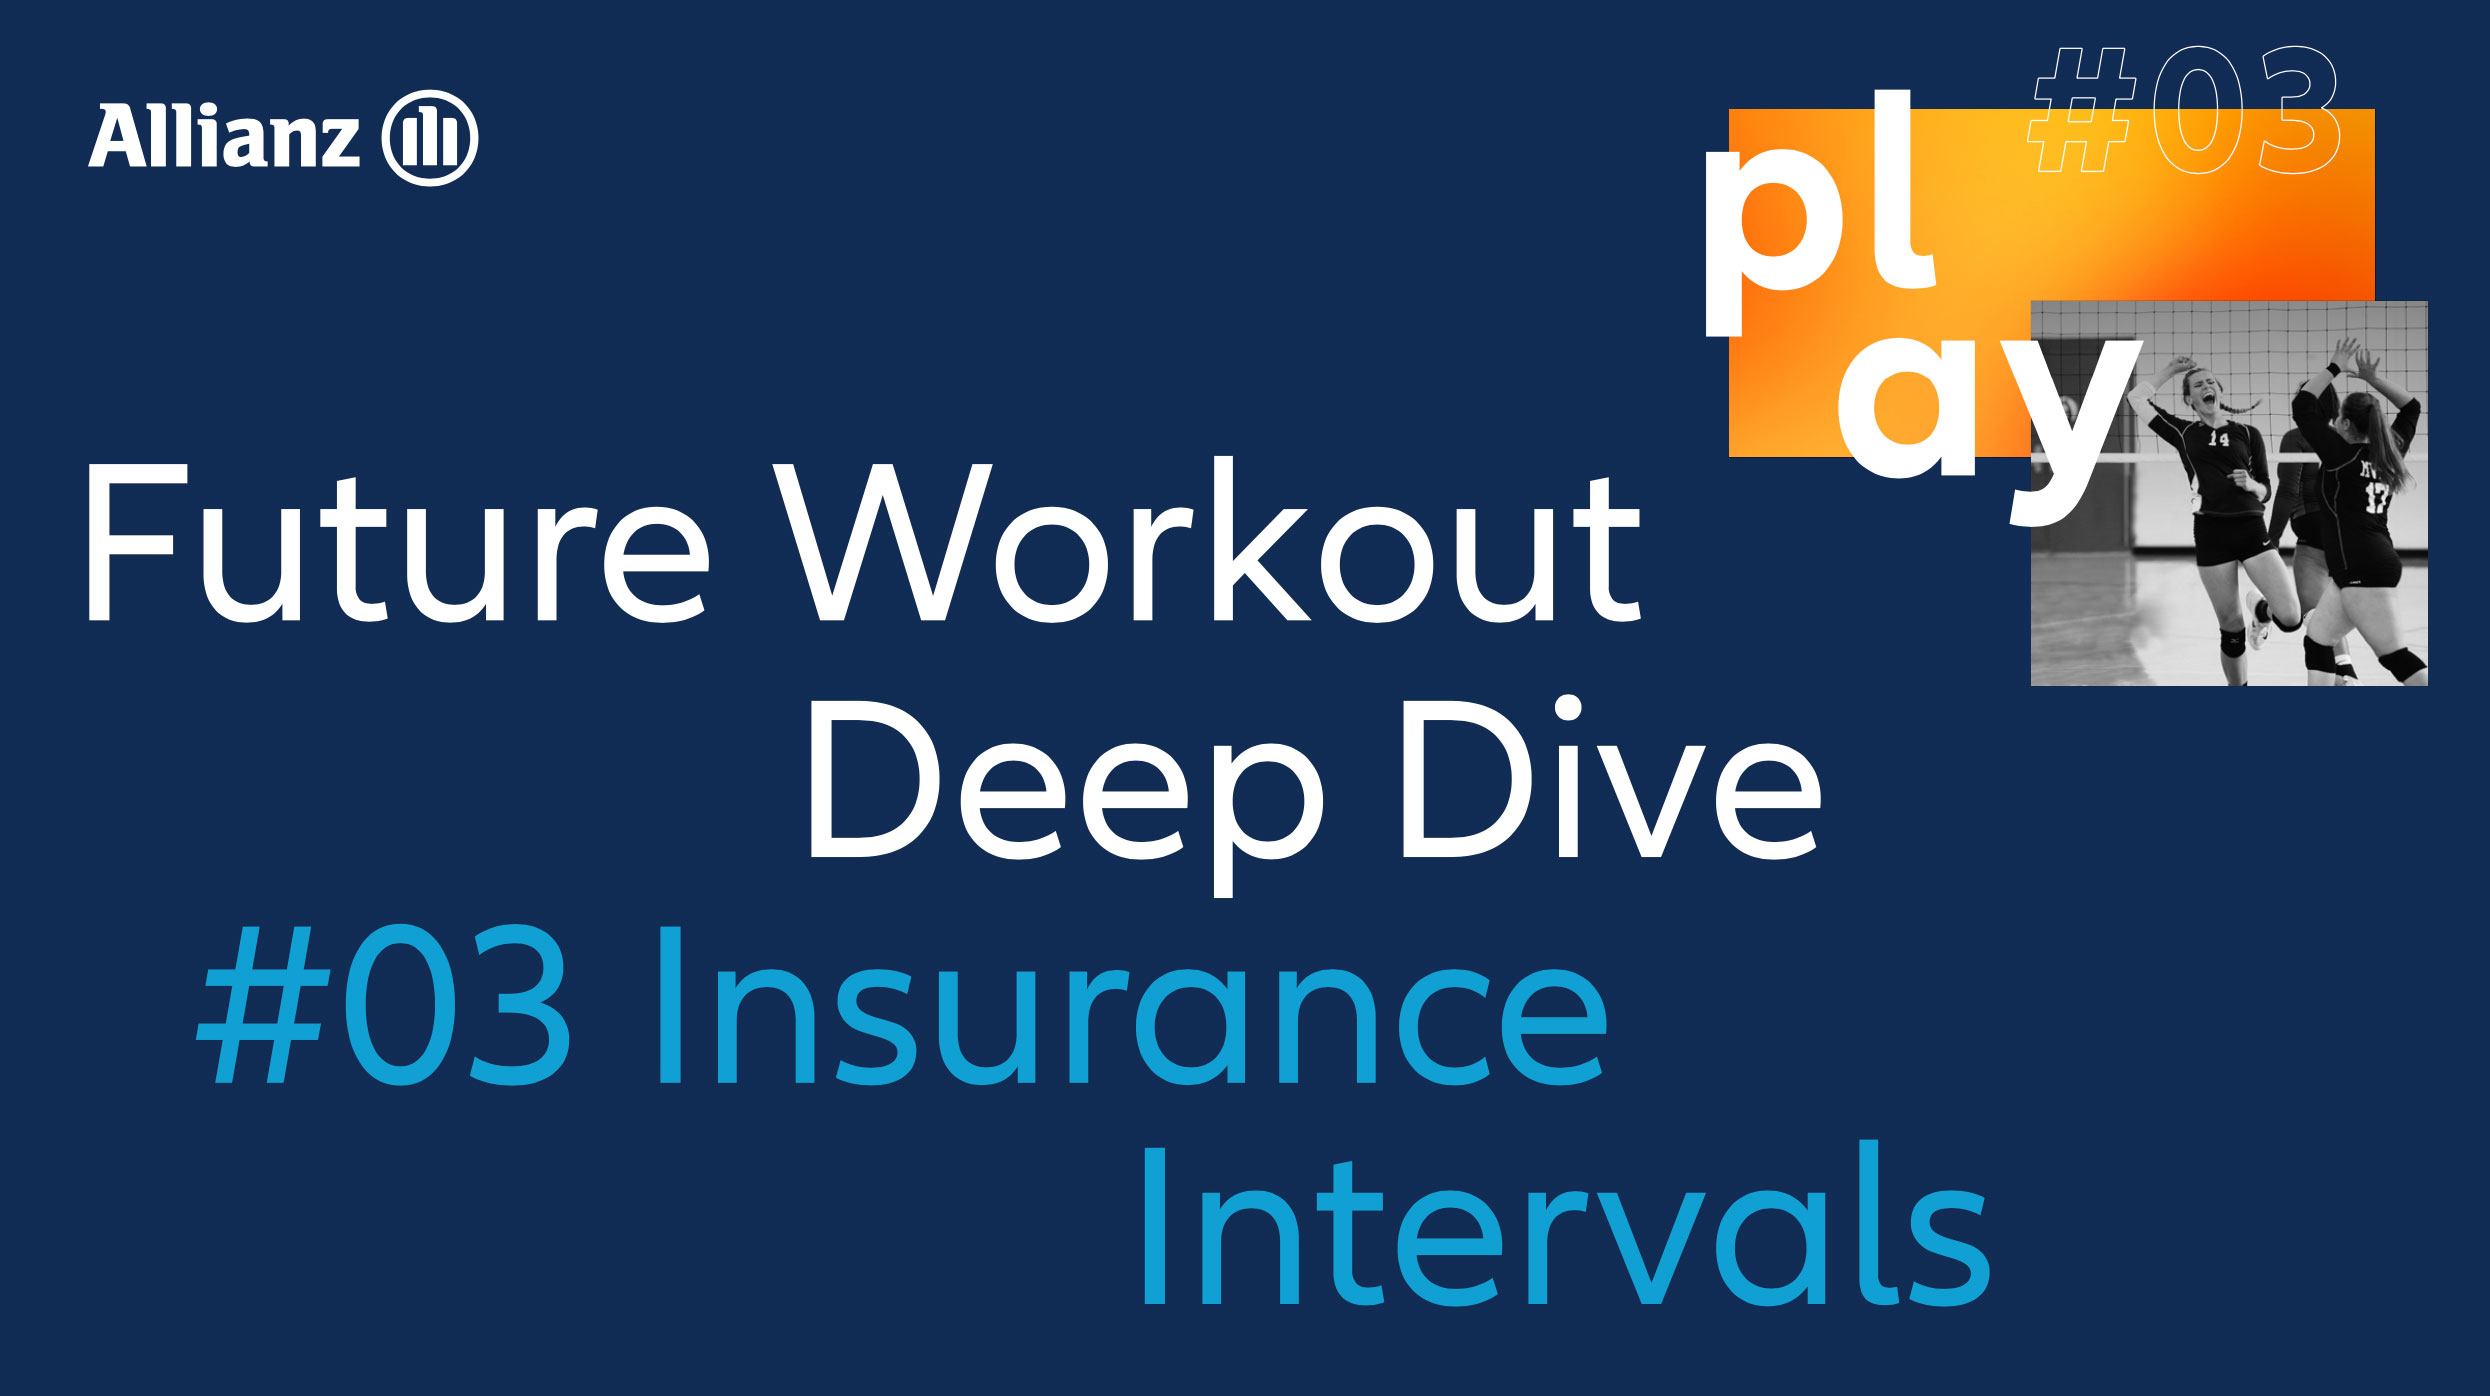 PDF title cover saying Future Workout Deep Dive #03 Insurance Intervals